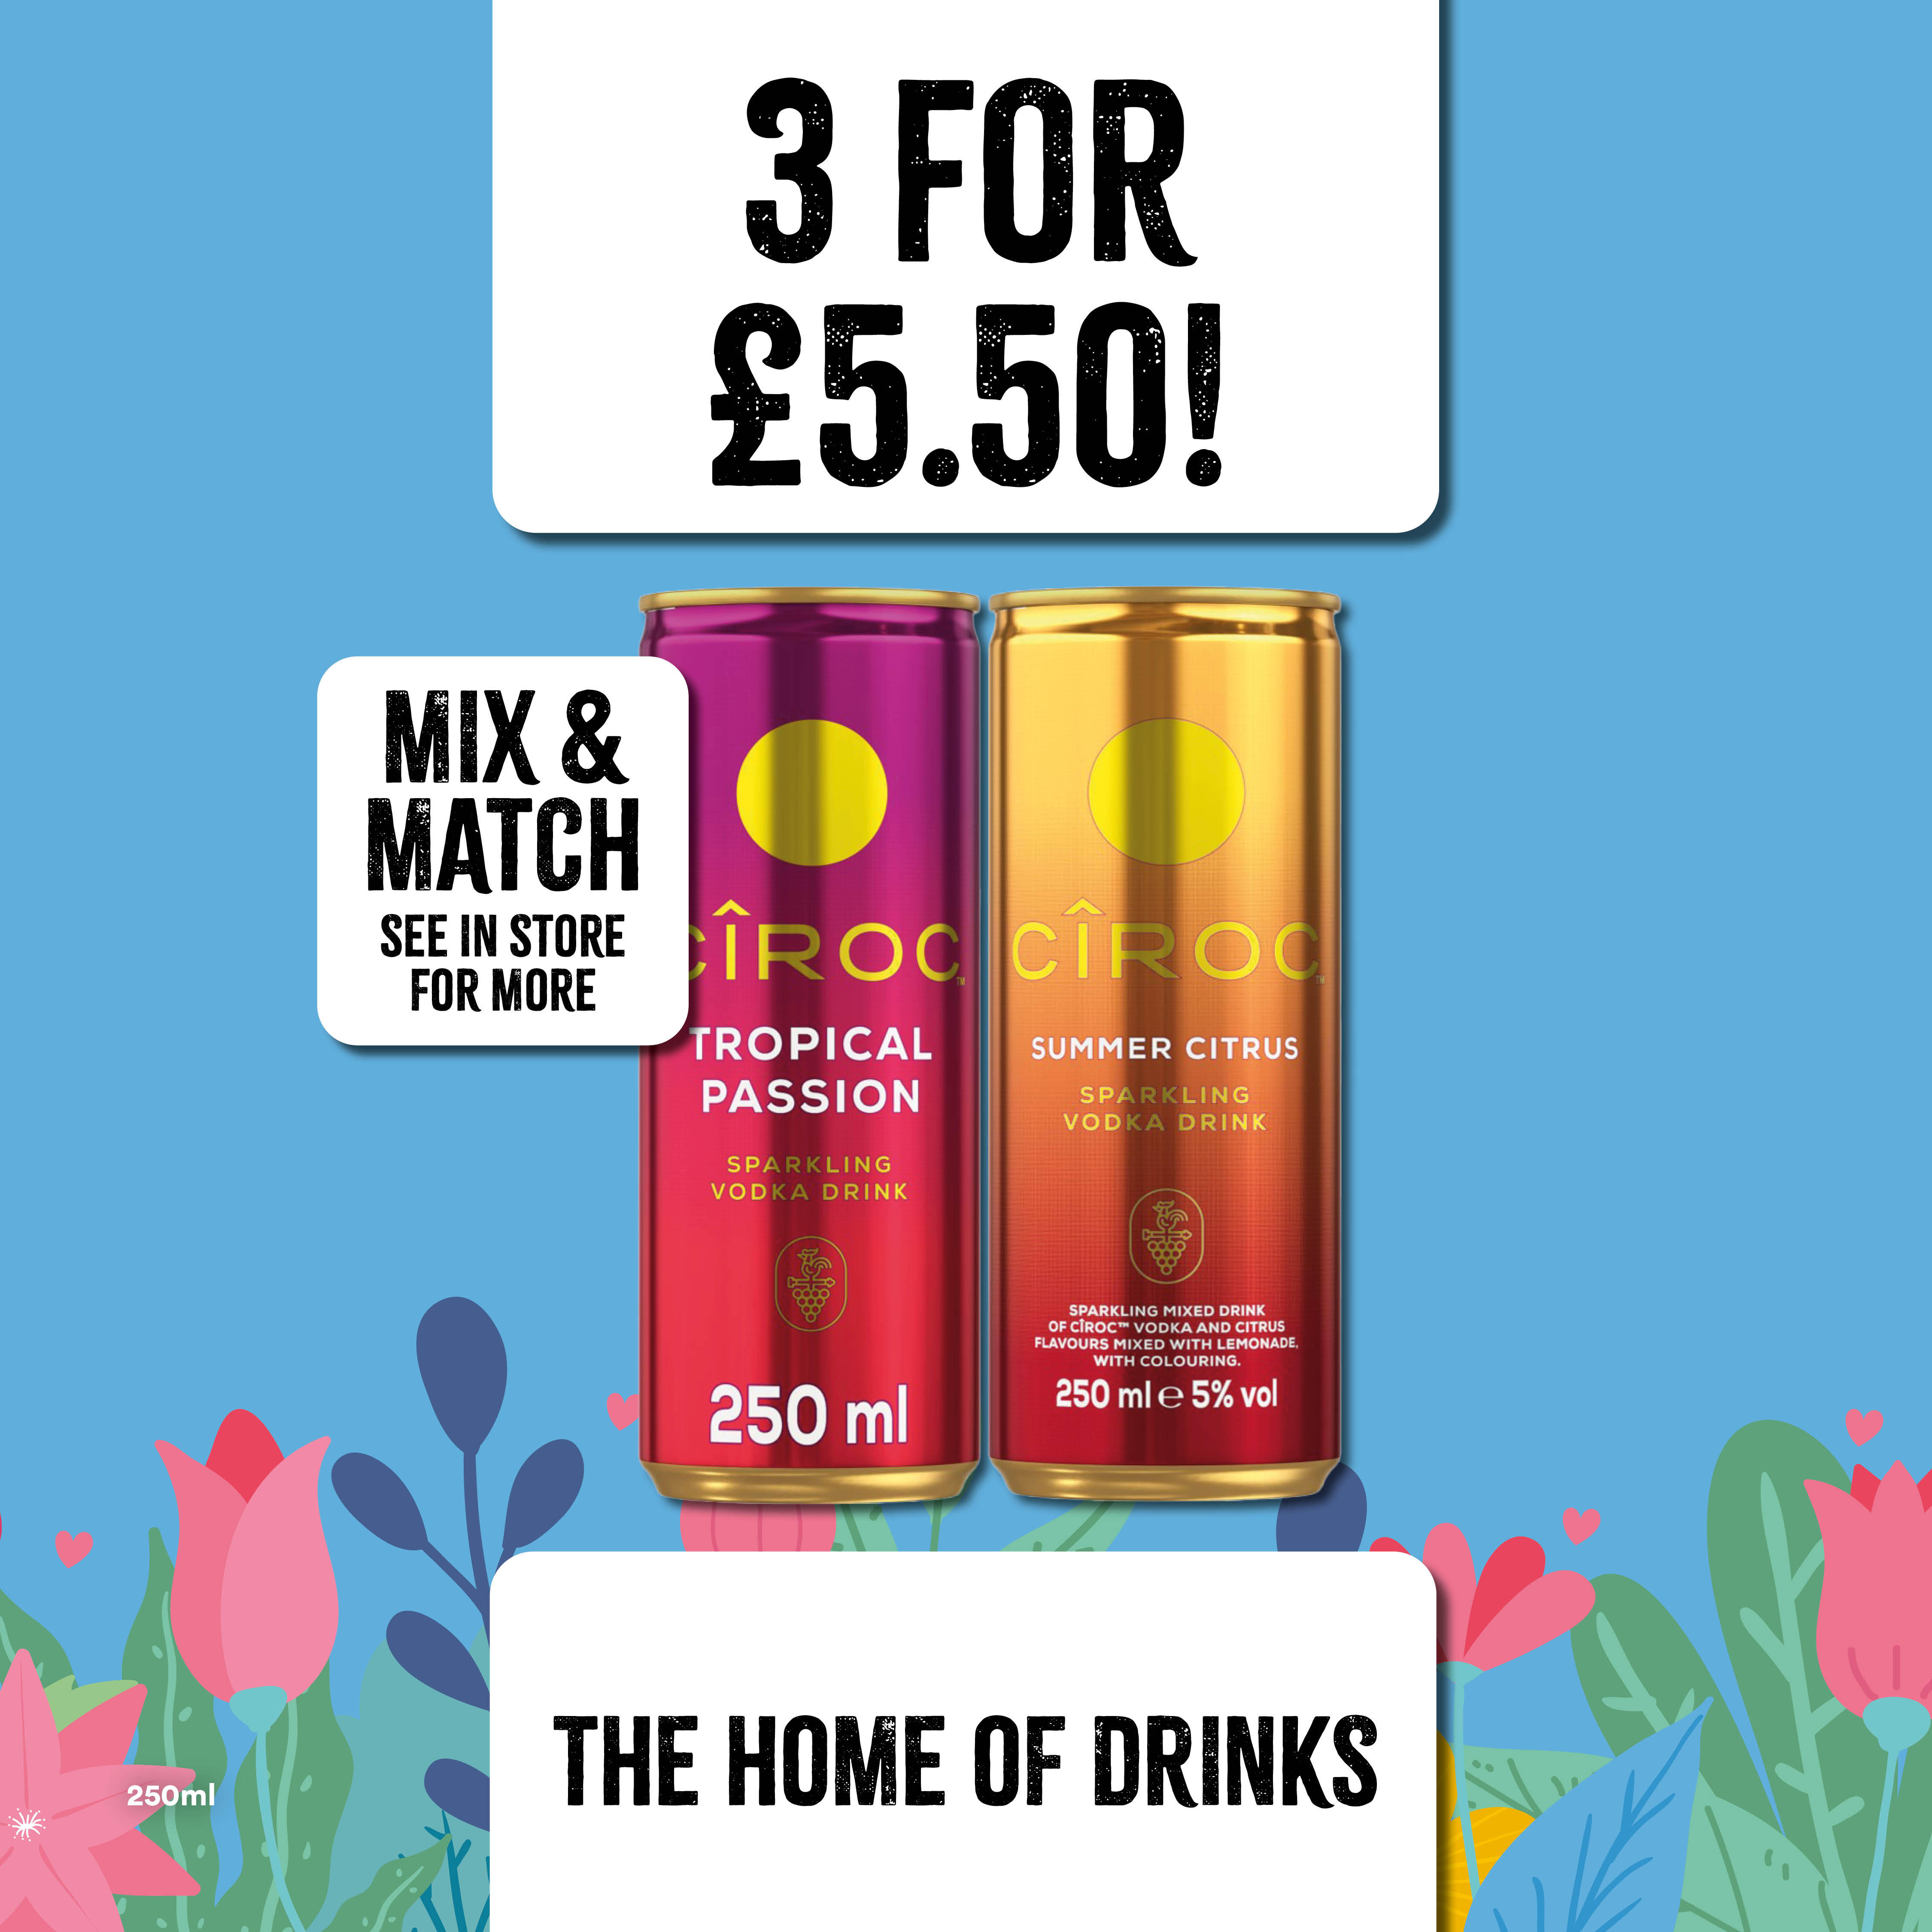 3 for £5.50 on ready to drink cans Bargain Booze (Upton Priory, Macclesfield) Macclesfield 01625 869004